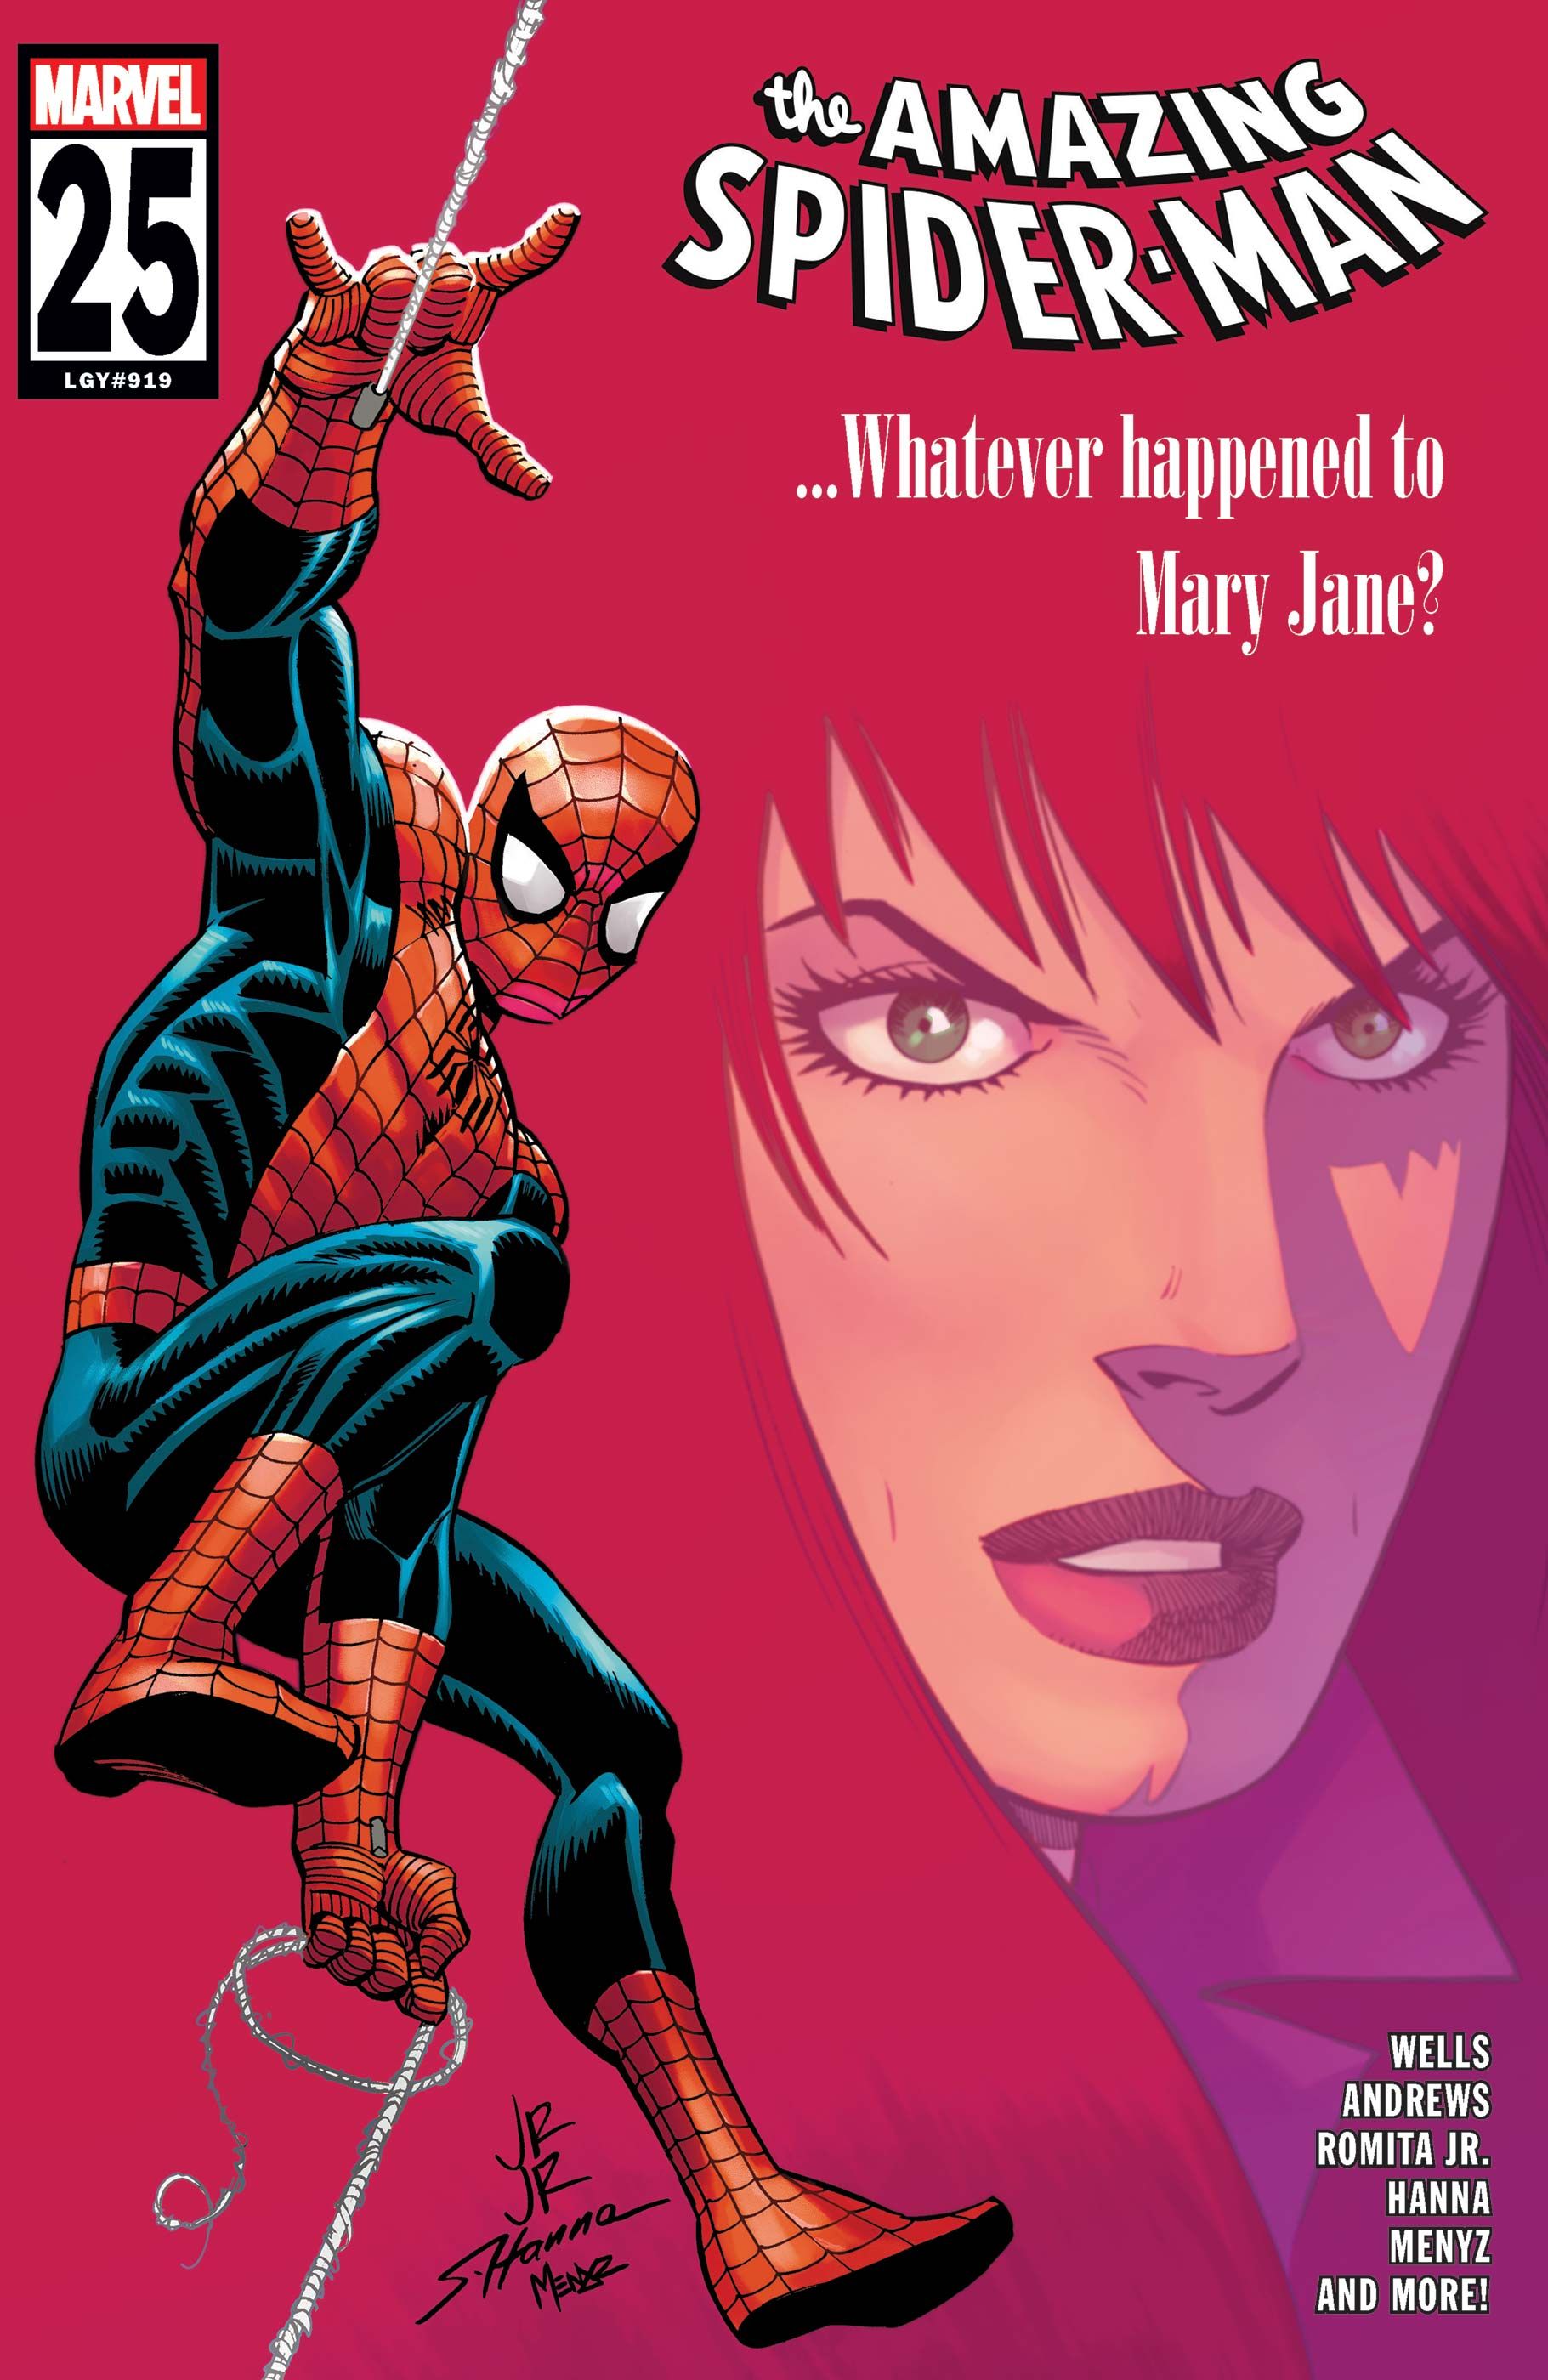 Cover A of Amazing Spider-Man #25 with Spider-Man swinging across the cover with Mary Jane in the background.